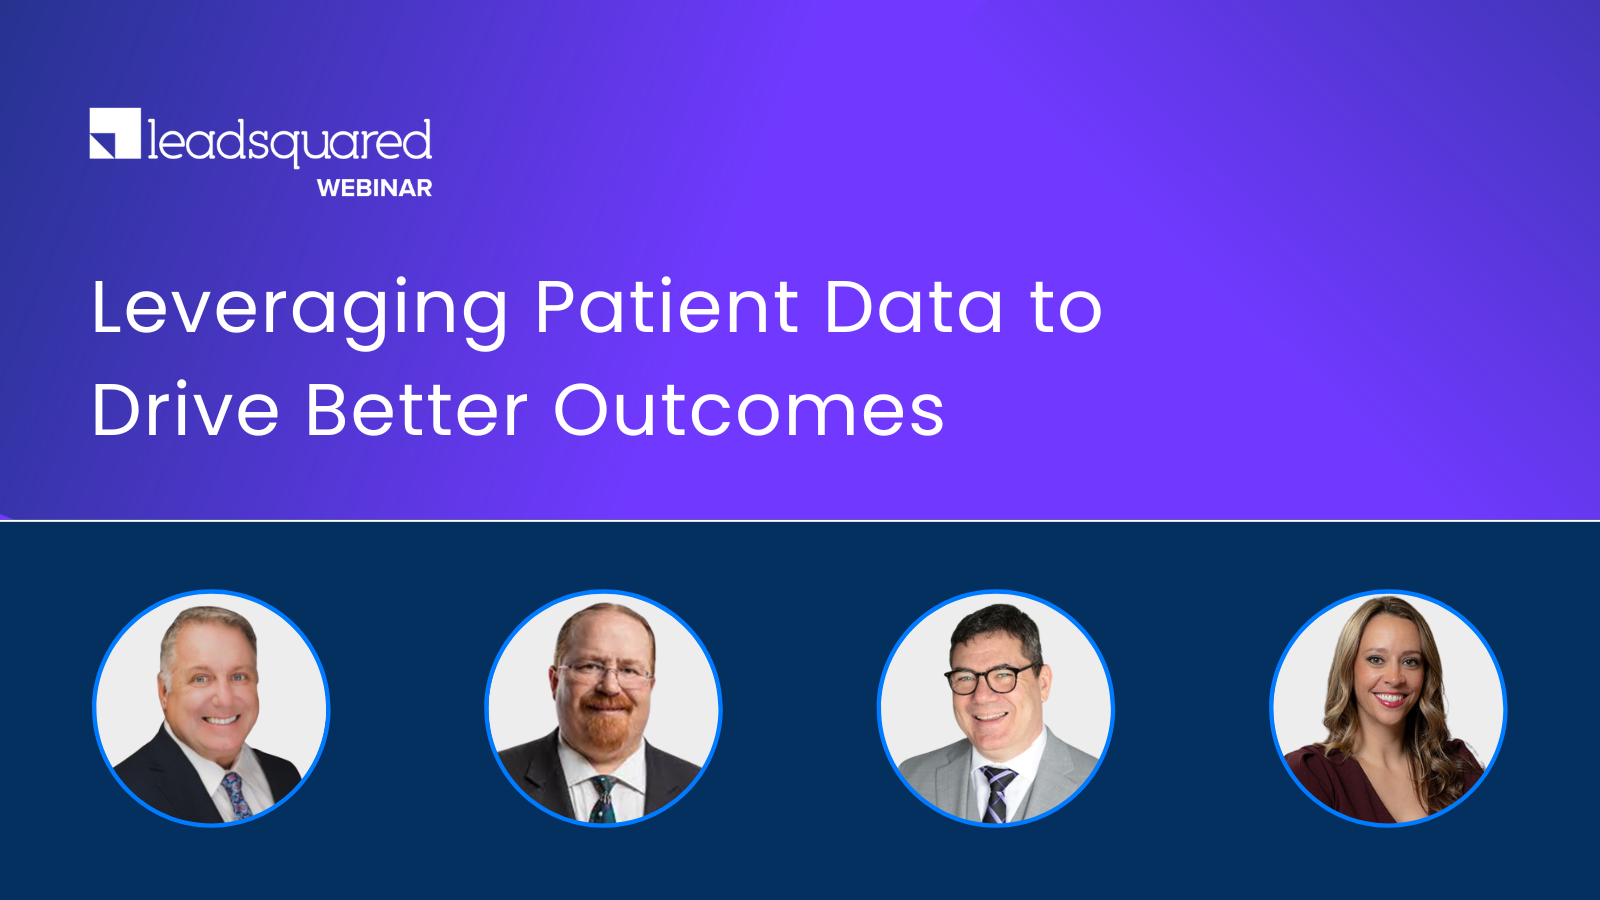 Leveraging Data to Drive Better Outcomes